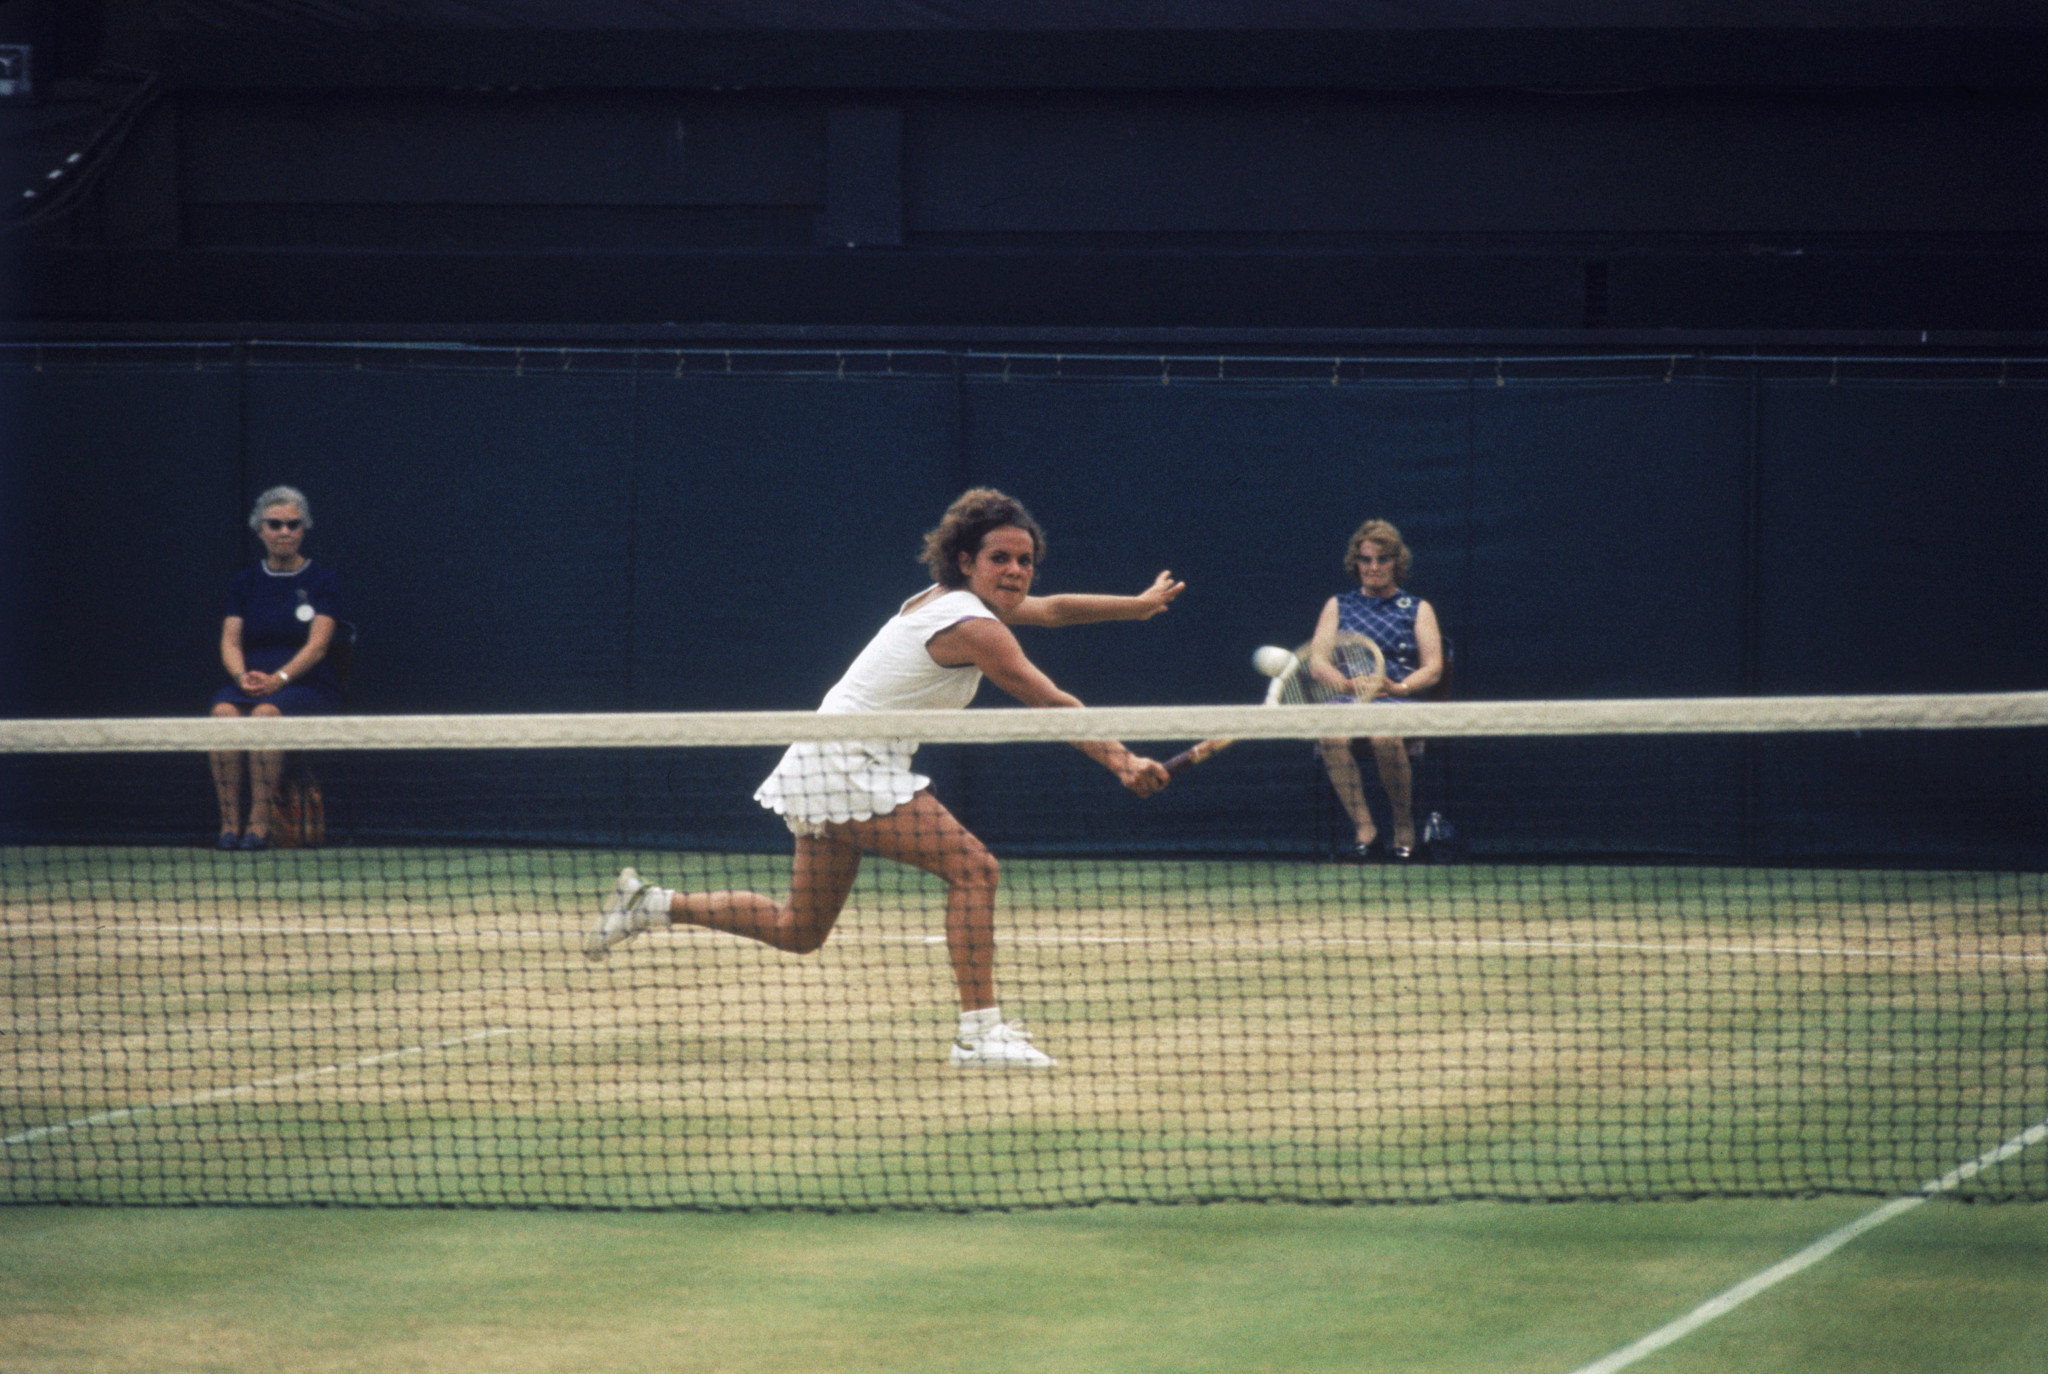 Evonne Goolagong Cawley is a two-time Wimbledon champion ©Getty Images